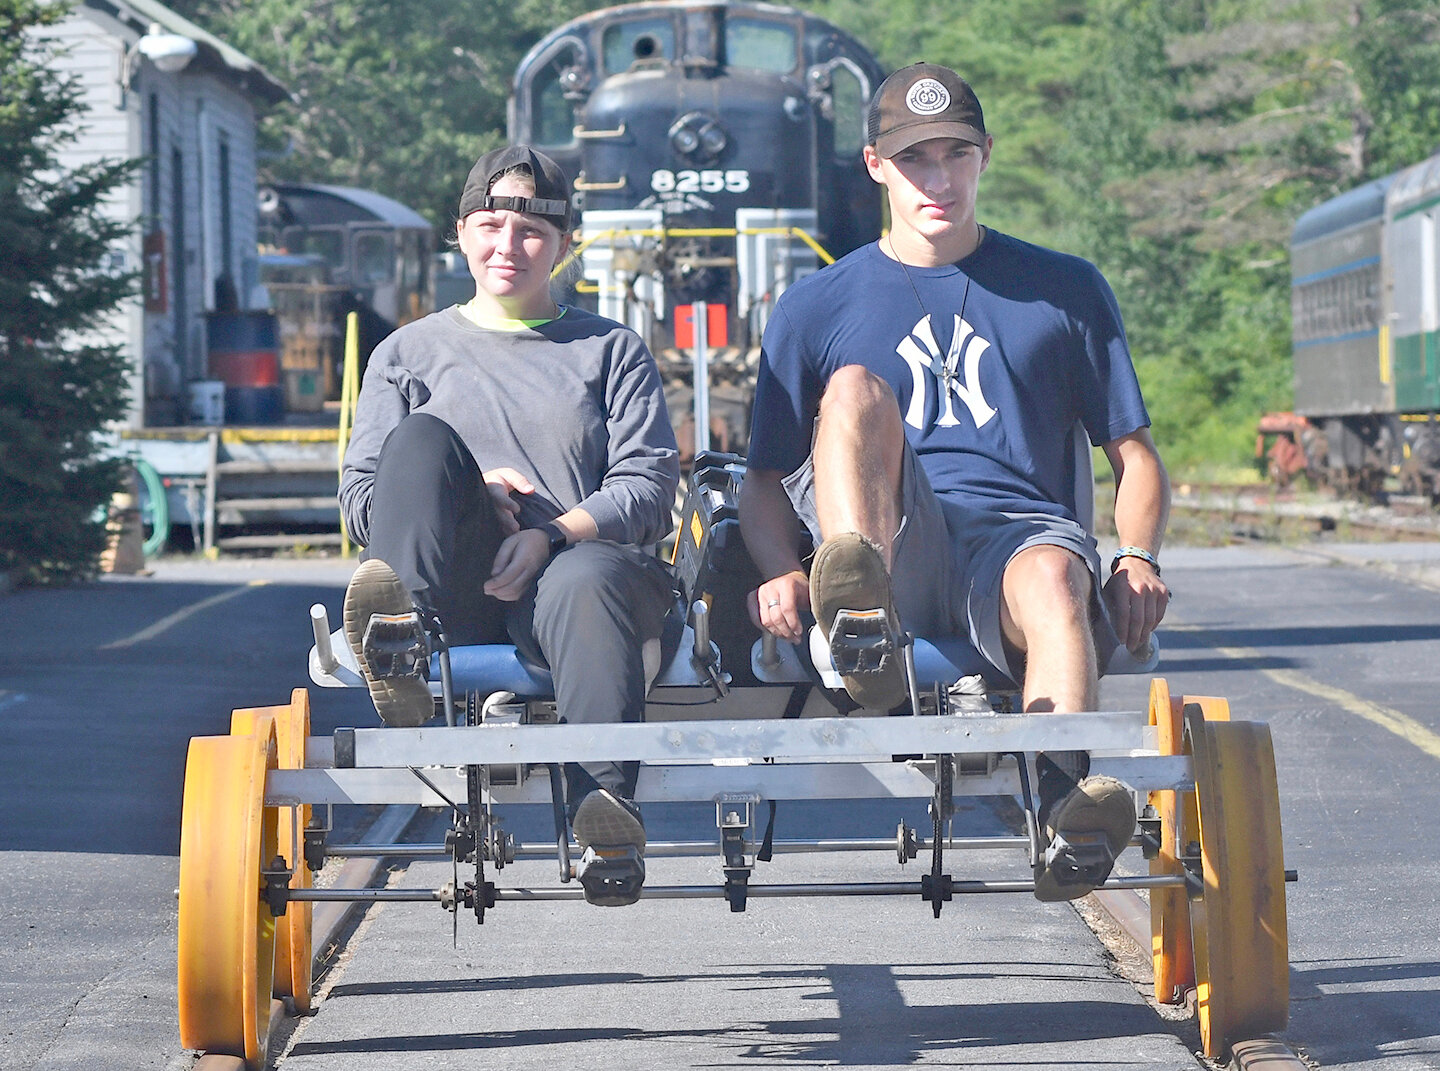 Adirondack Railbike Adventures announced a new brand campaign, including a new logo, slogan, and brand identity. Trips are offered in Old Forge and Tupper Lake from May to October.